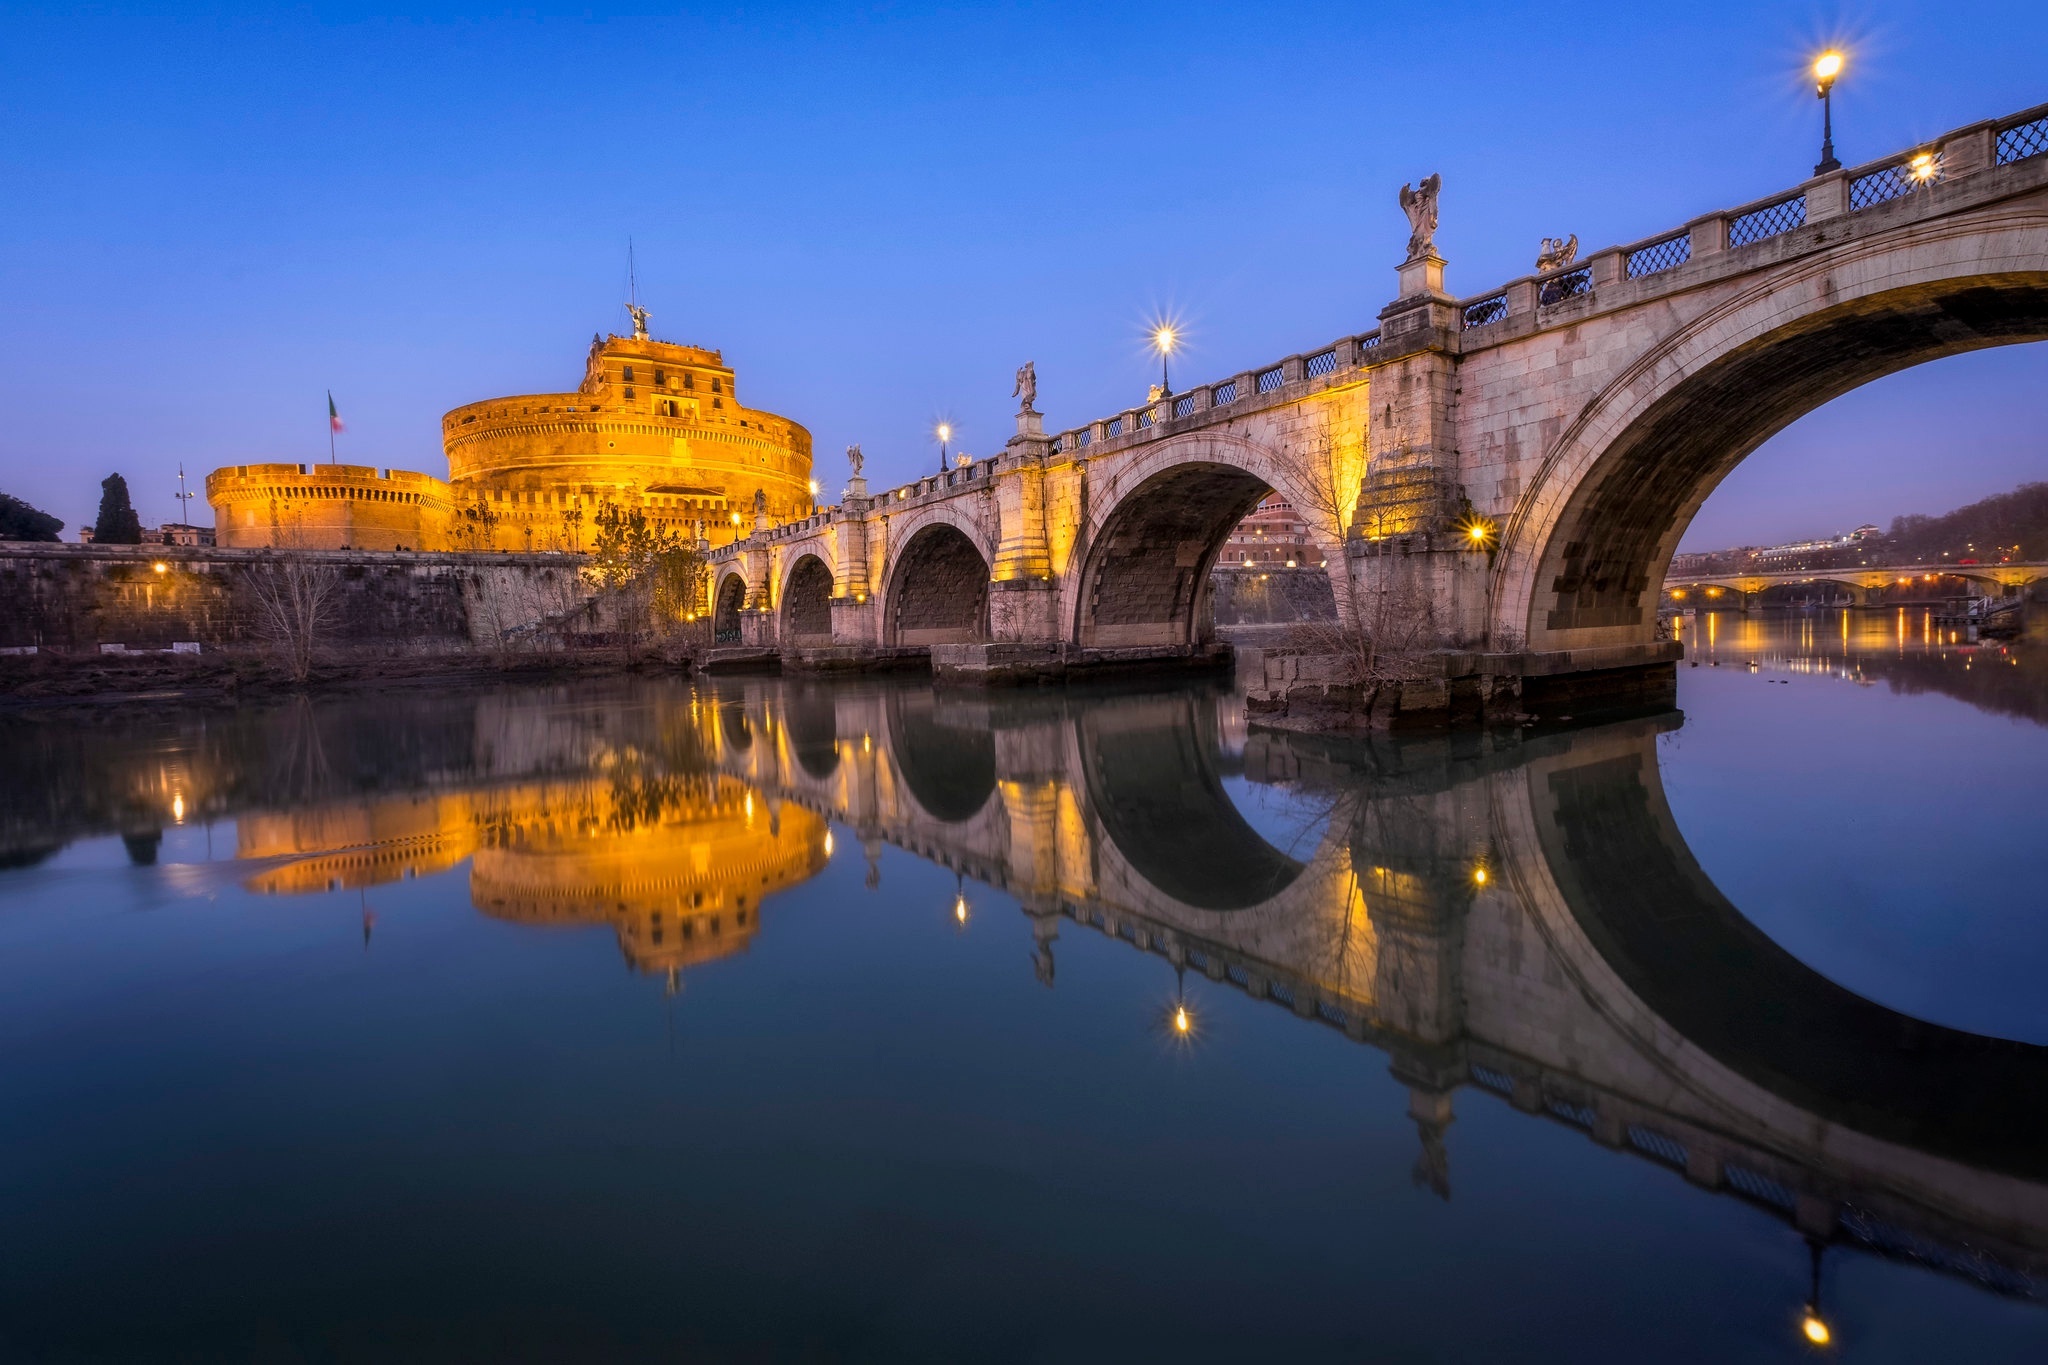 Rome: Castel Sant'Angelo, A towering cylindrical building in Parco Adriano. 2050x1370 HD Wallpaper.